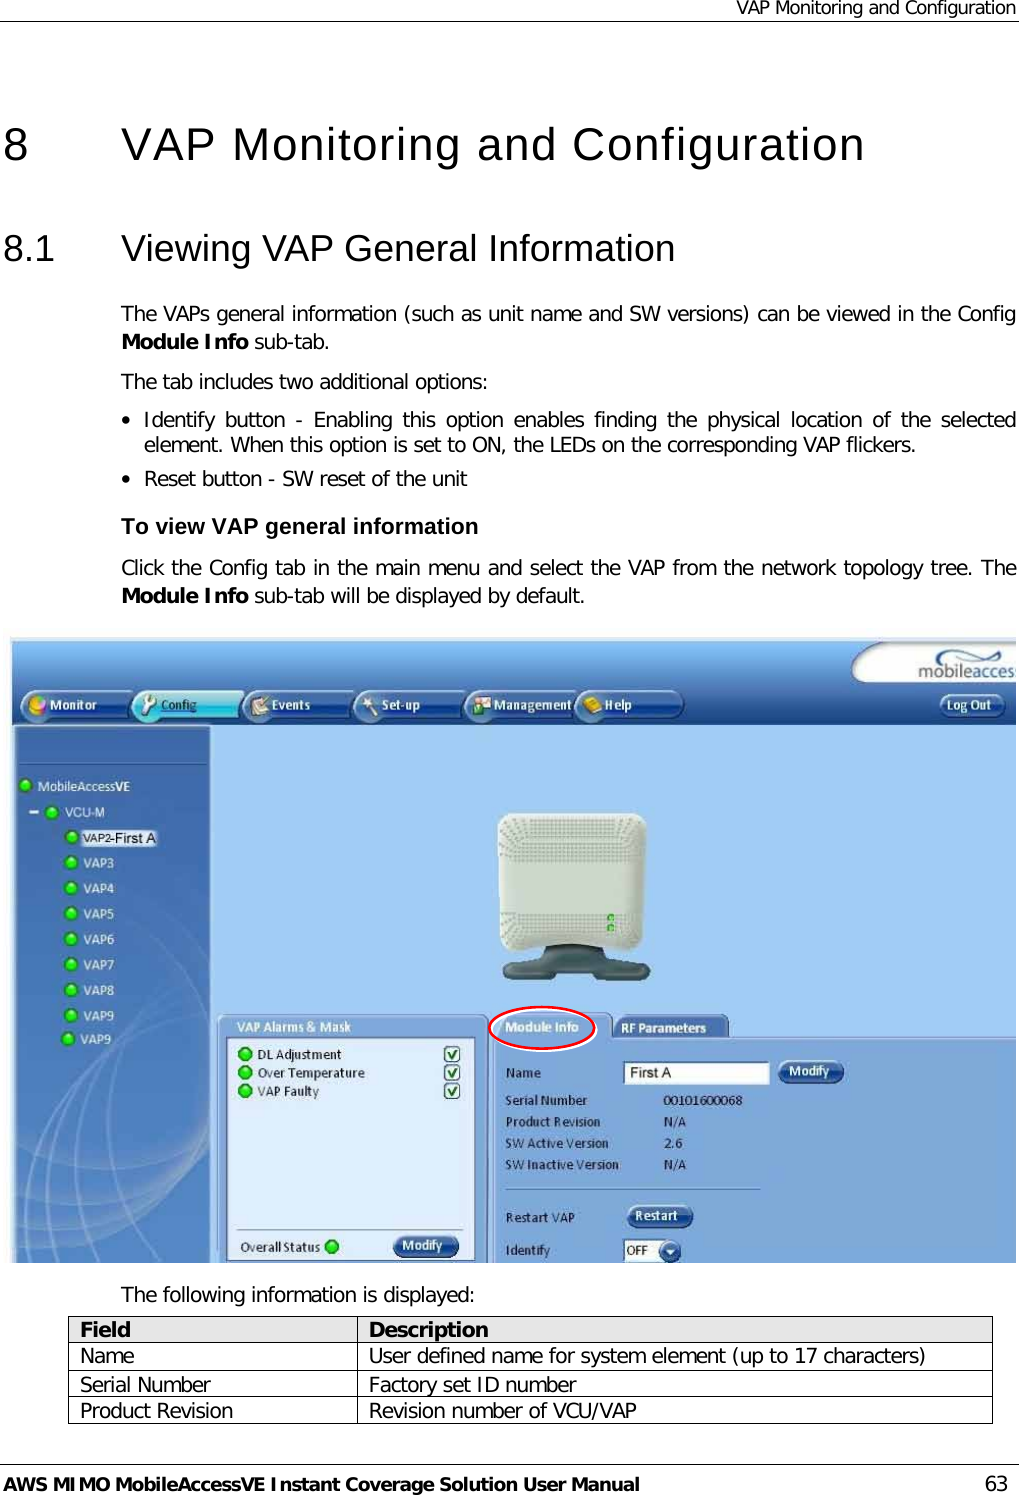 VAP Monitoring and Configuration AWS MIMO MobileAccessVE Instant Coverage Solution User Manual  63  8  VAP Monitoring and Configuration  8.1  Viewing VAP General Information The VAPs general information (such as unit name and SW versions) can be viewed in the Config Module Info sub-tab. The tab includes two additional options: • Identify button - Enabling this option enables finding the physical location of the selected element. When this option is set to ON, the LEDs on the corresponding VAP flickers. • Reset button - SW reset of the unit To view VAP general information Click the Config tab in the main menu and select the VAP from the network topology tree. The Module Info sub-tab will be displayed by default.  The following information is displayed: Field Description Name User defined name for system element (up to 17 characters) Serial Number Factory set ID number Product Revision Revision number of VCU/VAP 